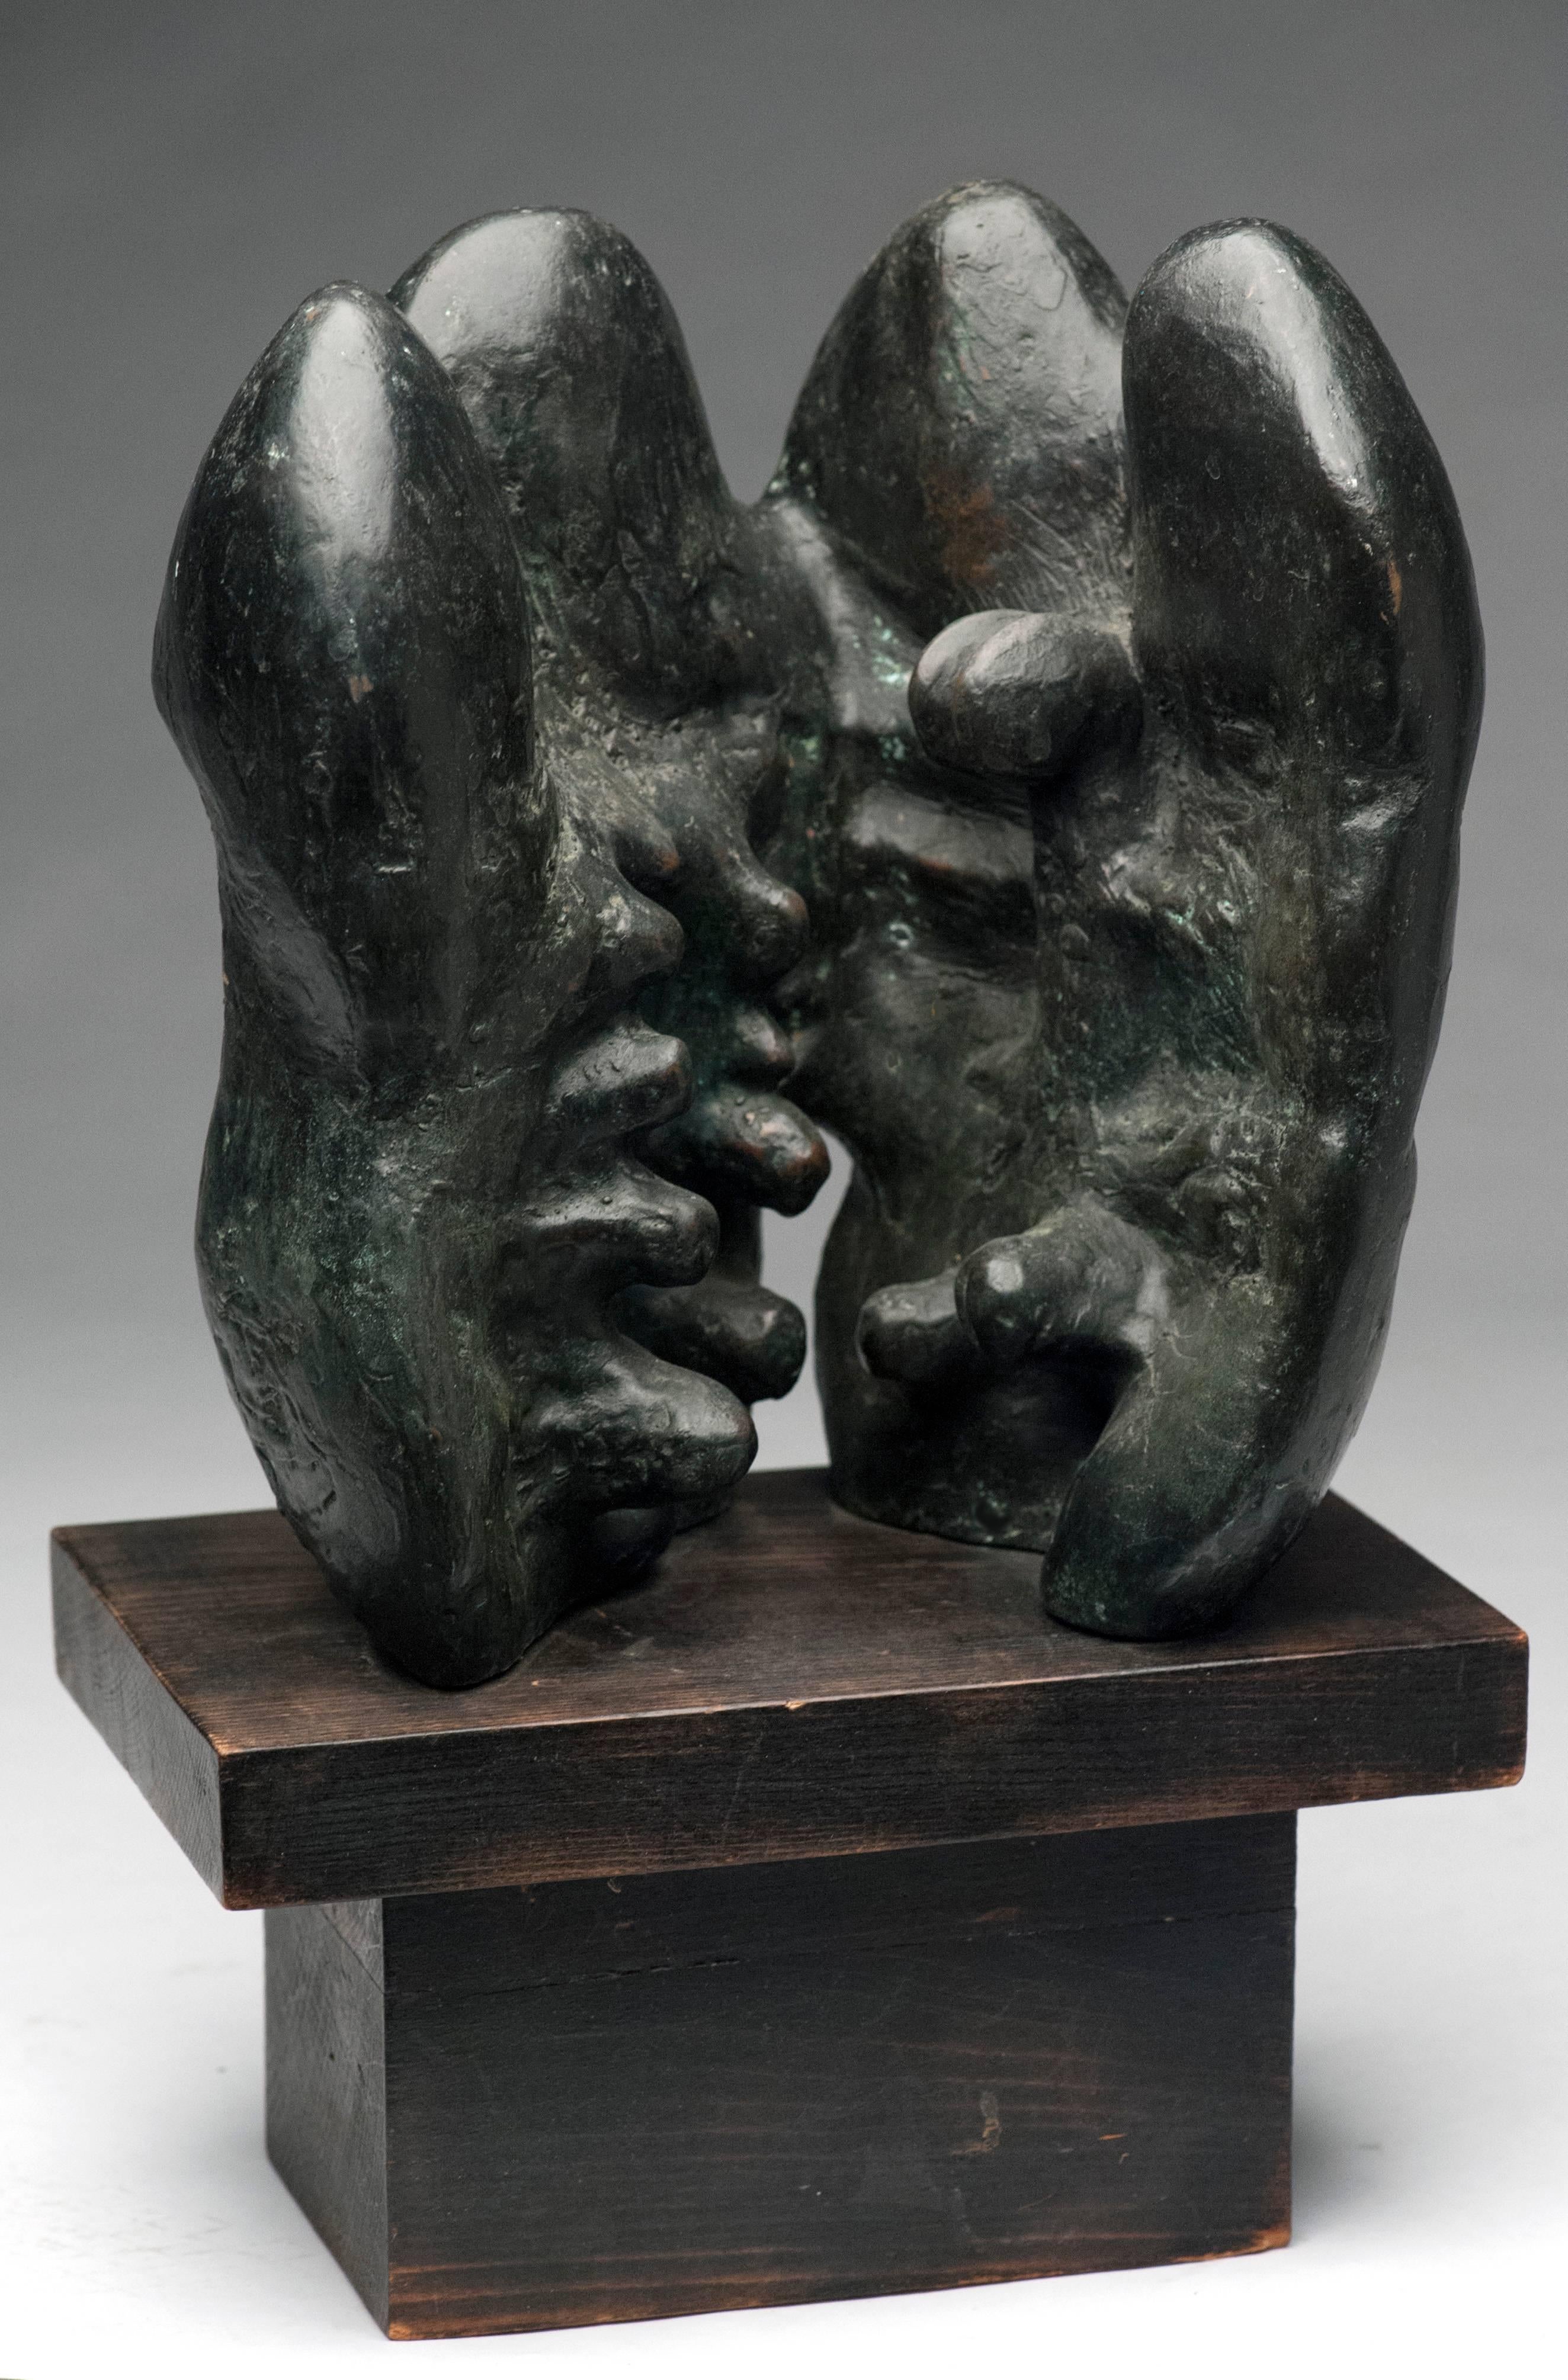 Appealing bronze sculpture by Latin American sculptor Raúl Valdivieso (Chilean, 1931-1993). Valdivieso is known for his reinterpretation of the Classic organic forms and human figures. Sculpture is signed and retains original wood base. 

Raúl